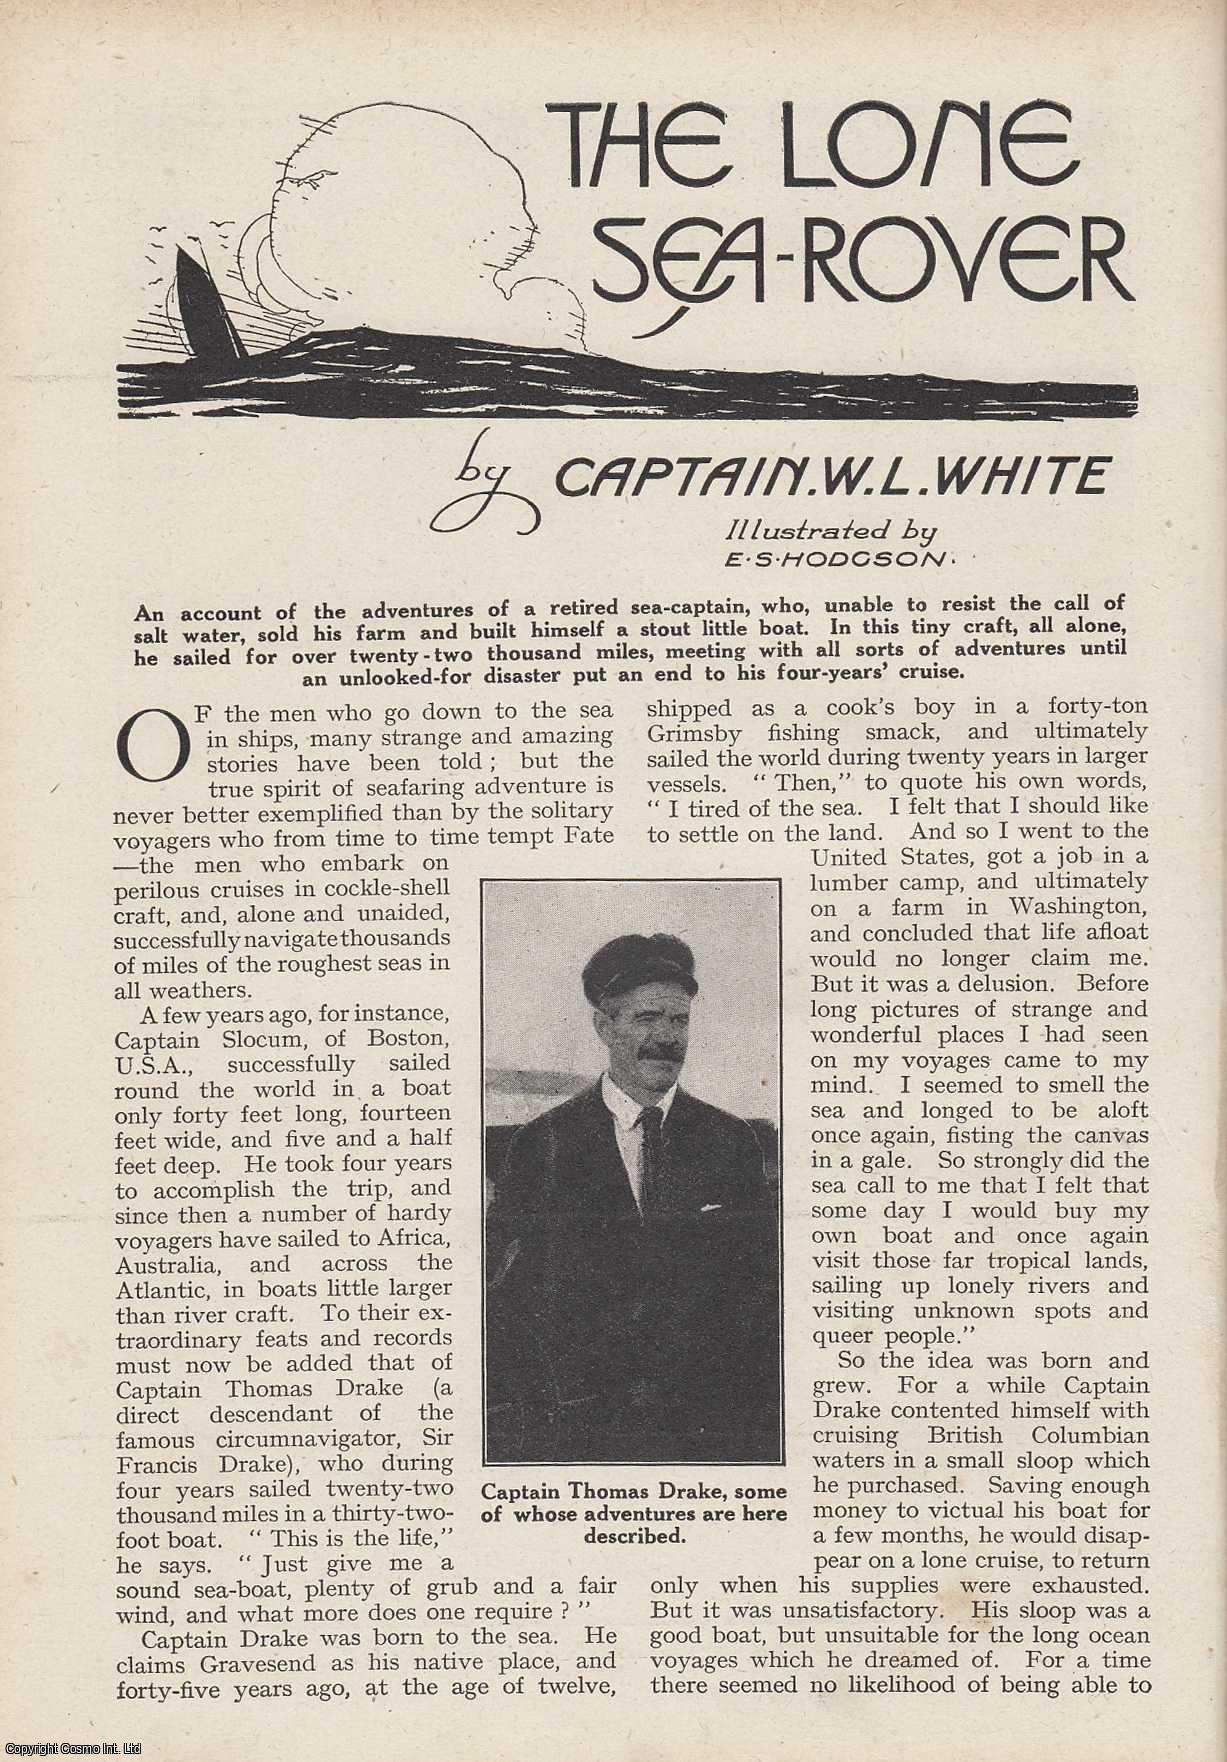 Captain W.L. White. Illustrated by E.S. Hodgson. - The Lone Sea-Rover : Captain Thomas Drake Voyage of 22,000 miles alone. An uncommon original article from the Wide World Magazine, 1921.